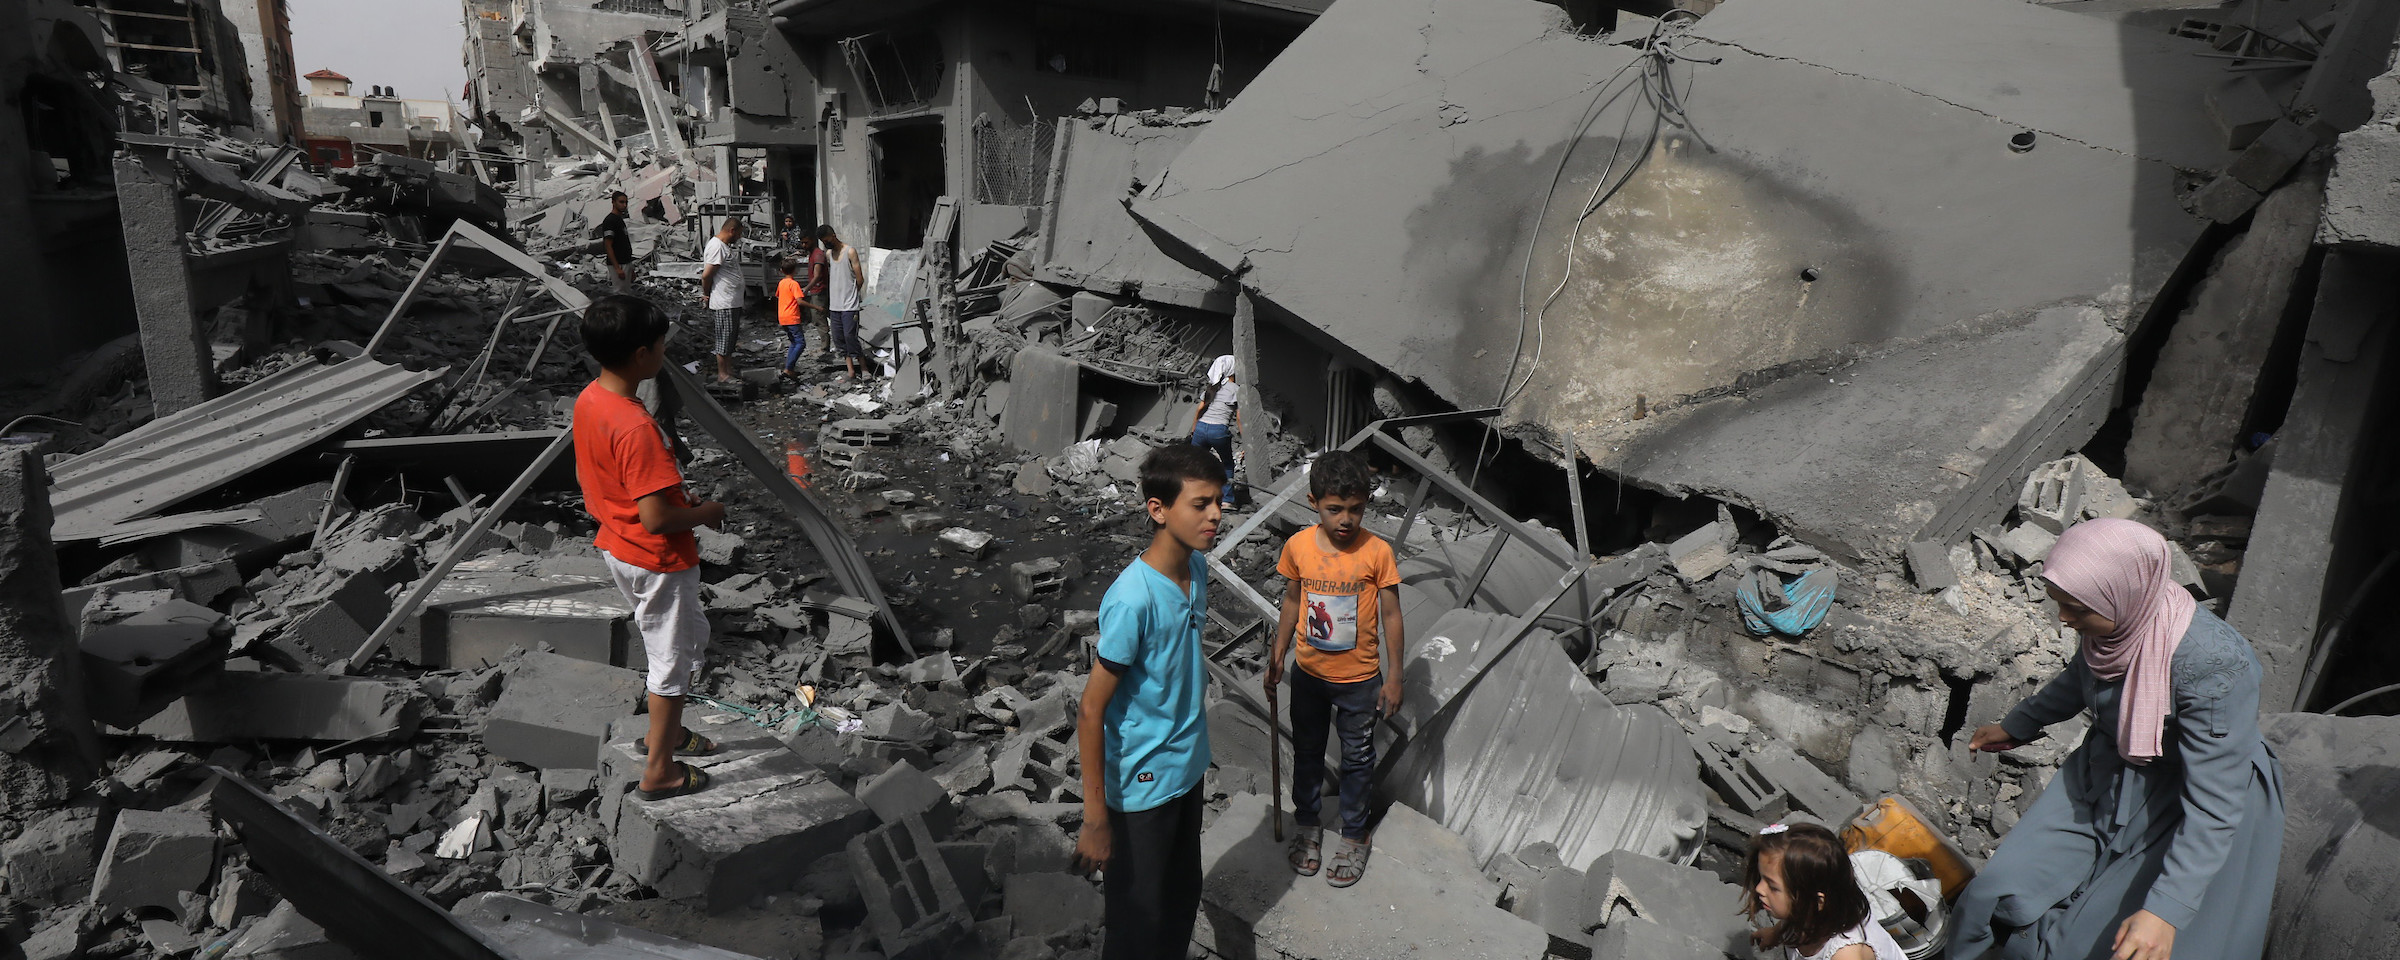 Women and children in brightly colored clothing stand on and walk over concrete rubble